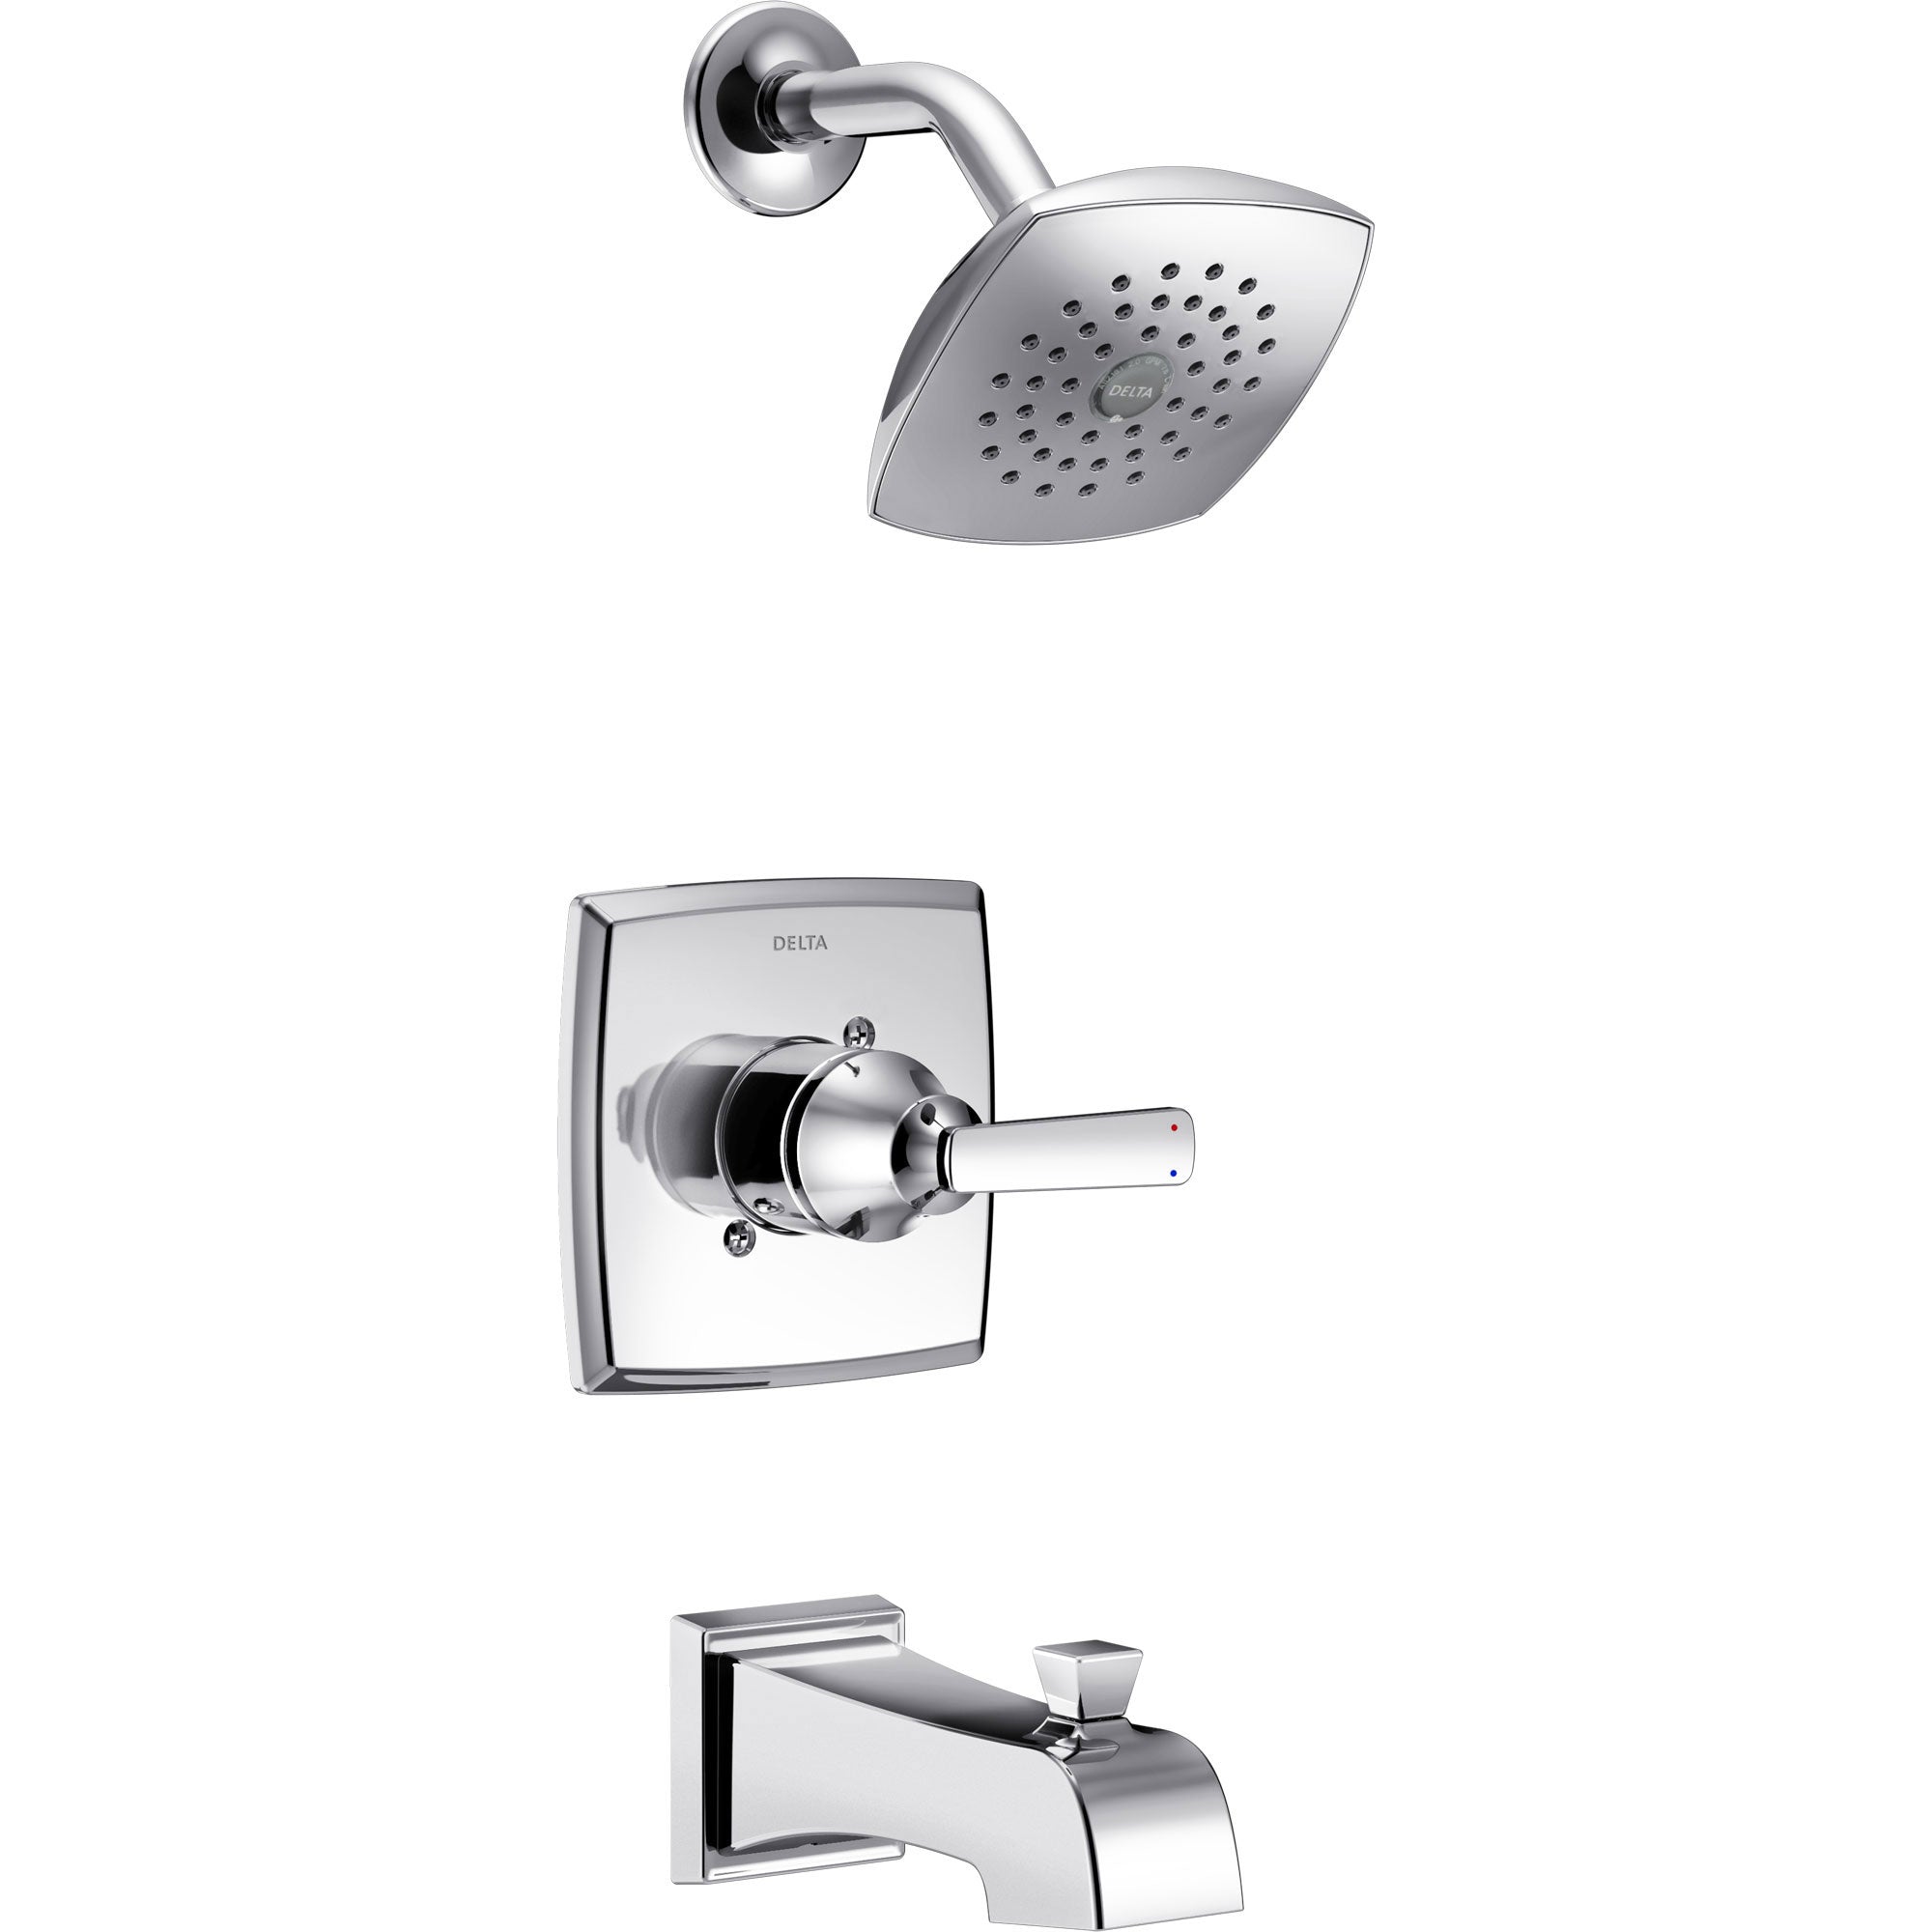 Delta Ashlyn Modern Chrome Finish 14 Series Watersense Single Handle Tub and Shower Combination Faucet INCLUDES Rough-in Valve with Stops D1175V